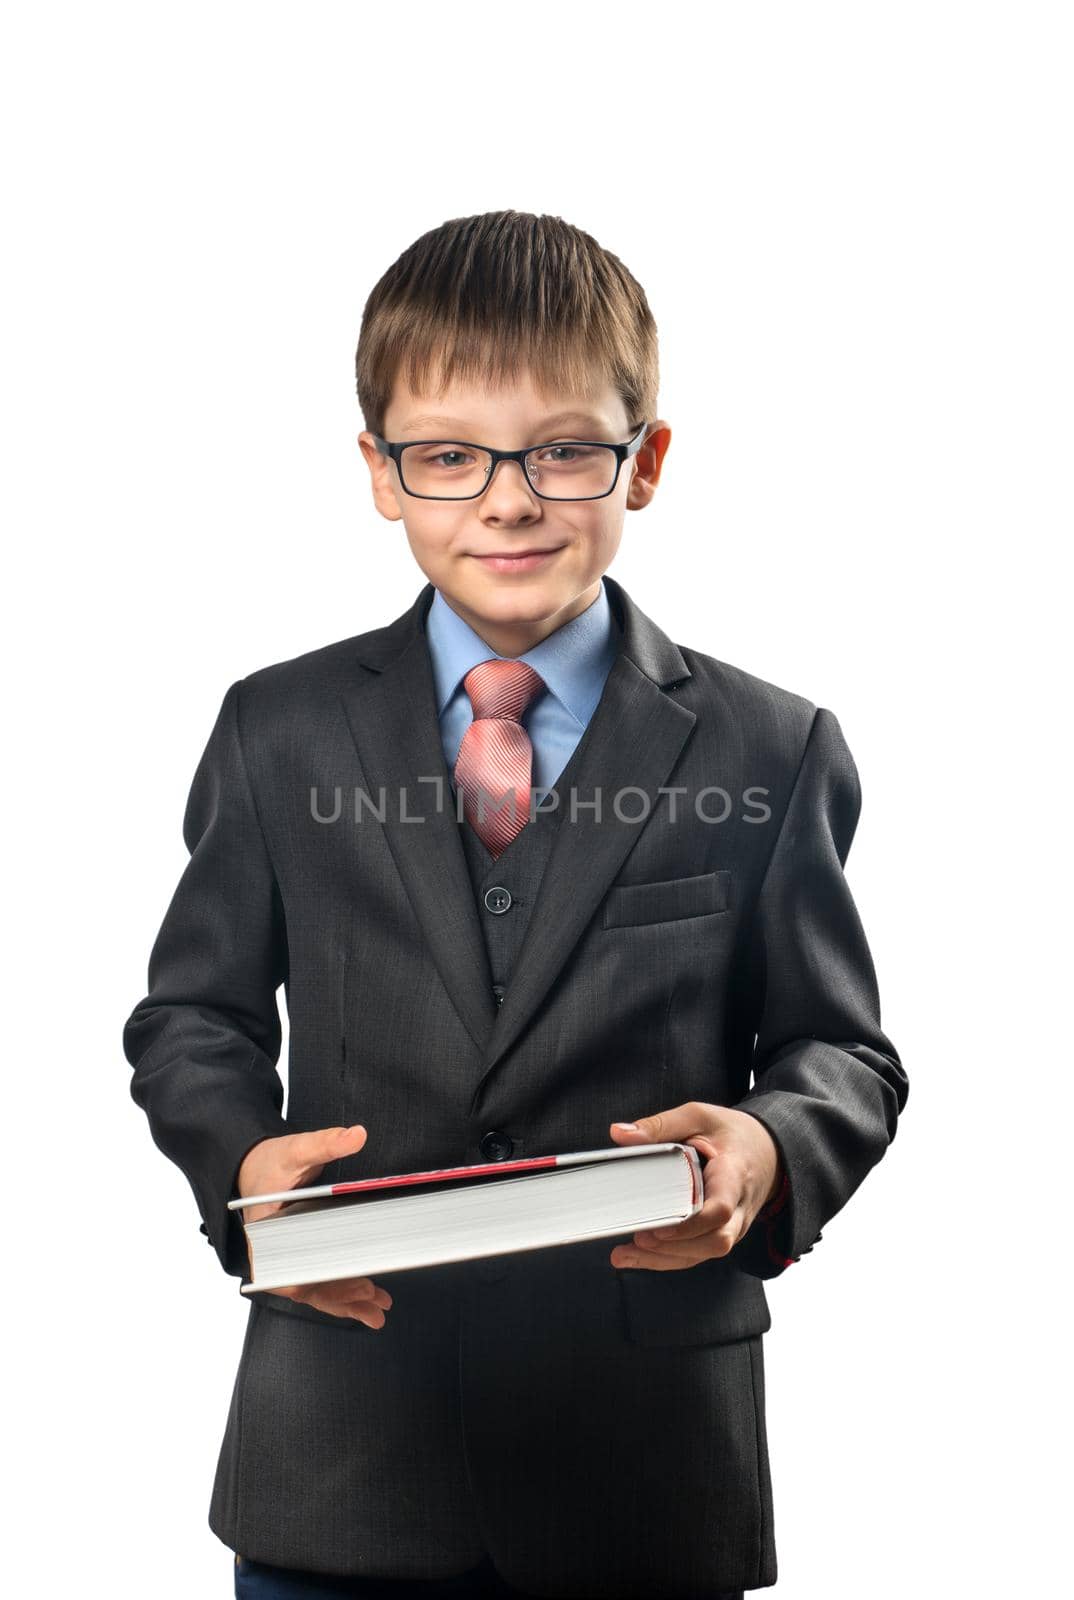 Cute schoolboy with glasses is holding a book